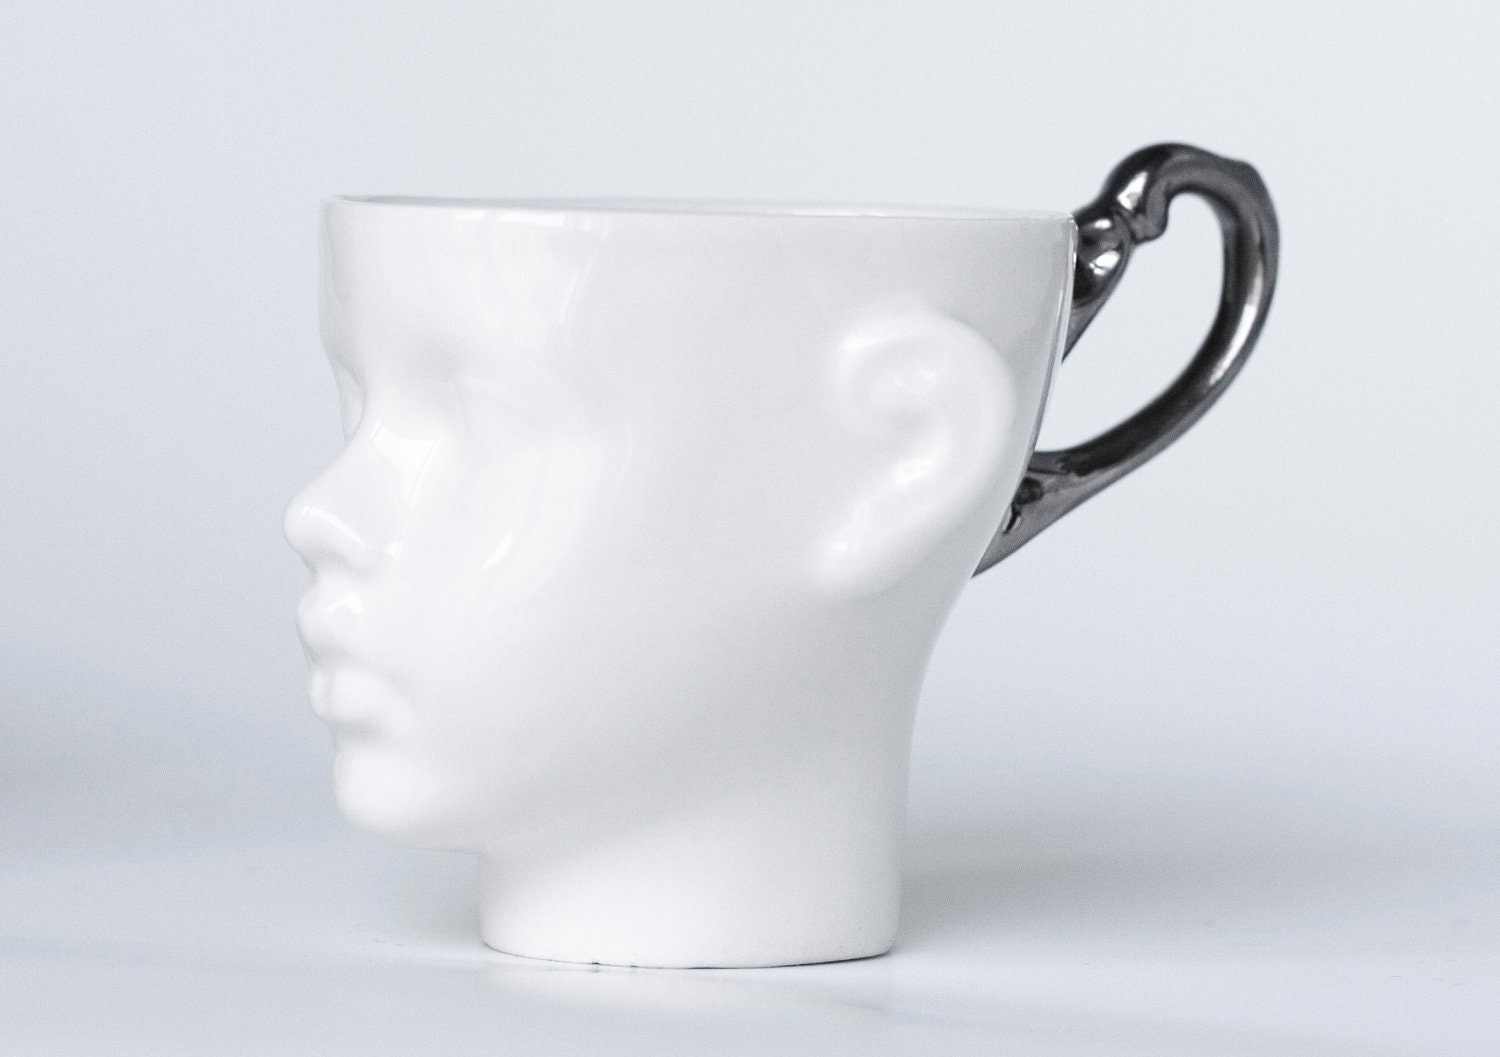 Whimsical doll head cup - white porcelain and silver artisan cup, whimsical ceramic design